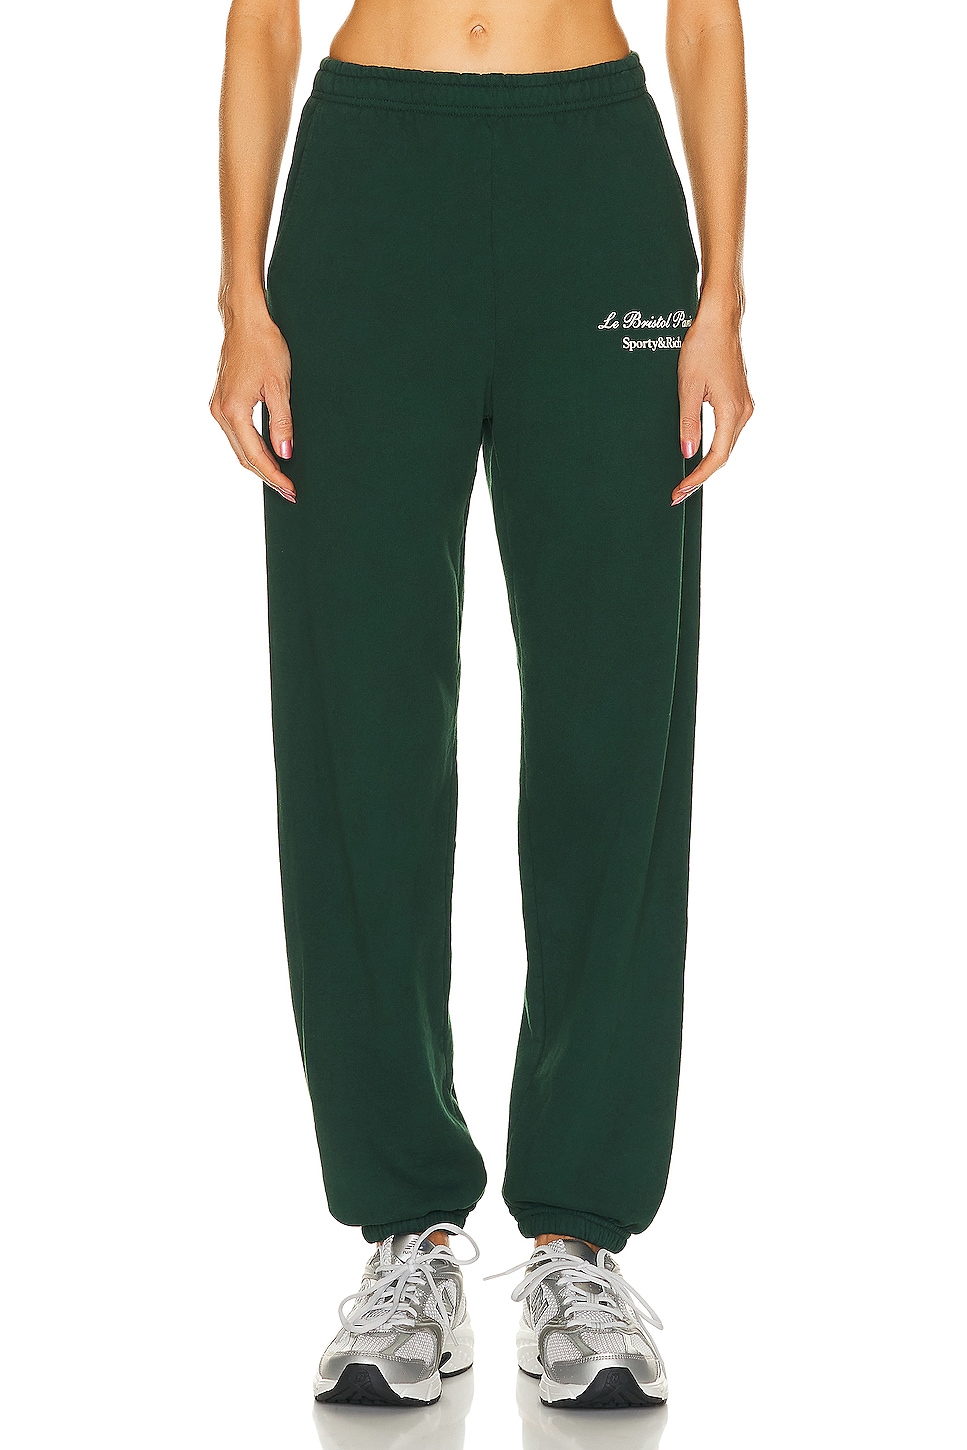 Image 1 of Sporty & Rich X Le Bristol Paris Faubourg Sweatpant in Forest Green Cream